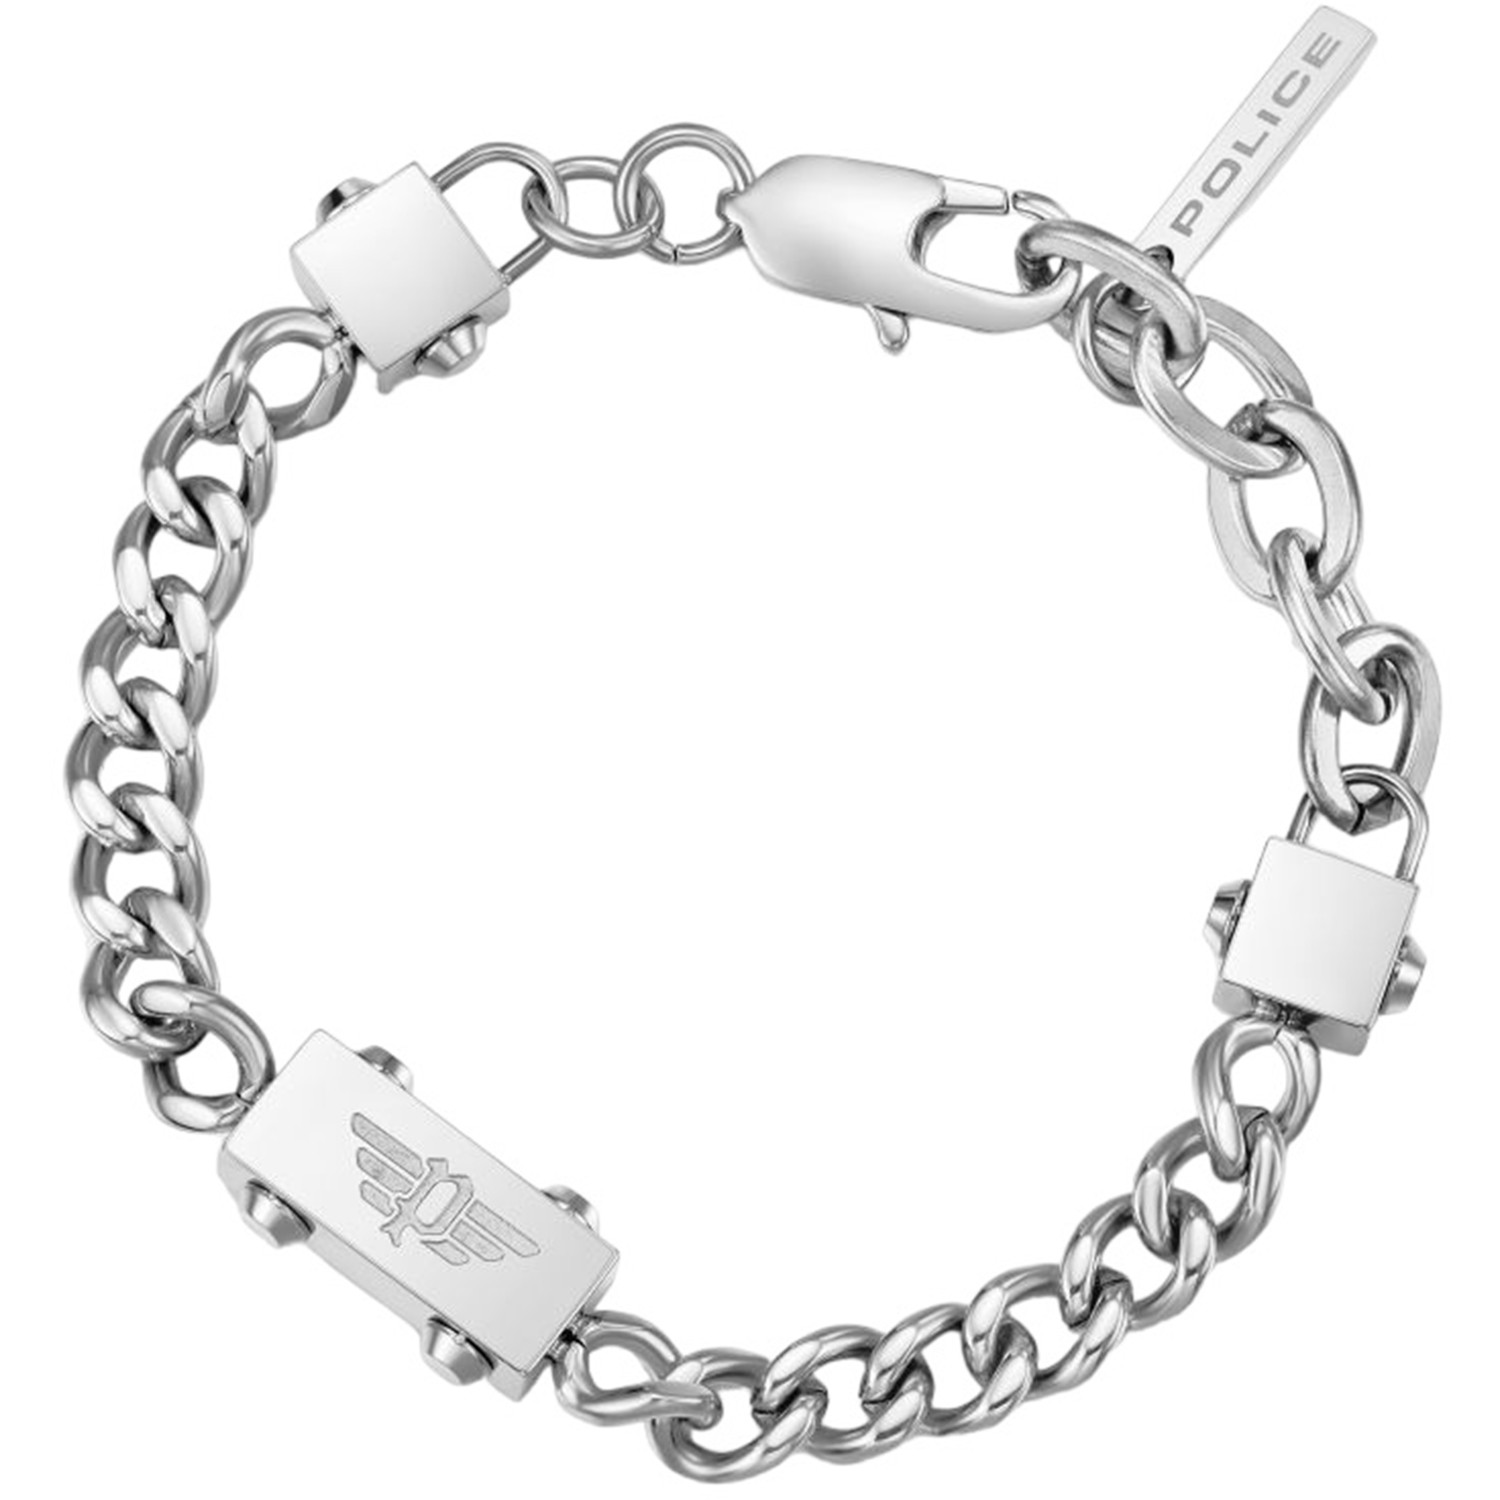 Steel Comprar | PEAGB0002102 Stainless Bracelets PEAGB0002102 Police online | Men\'s Barato Clicktime.eu» CHAINED Police Men\'s Stainless Bracelets Silver Men\'s Bracelets Comprar CHAINED Silver Bracelets Police PEAGB0002102 Steel